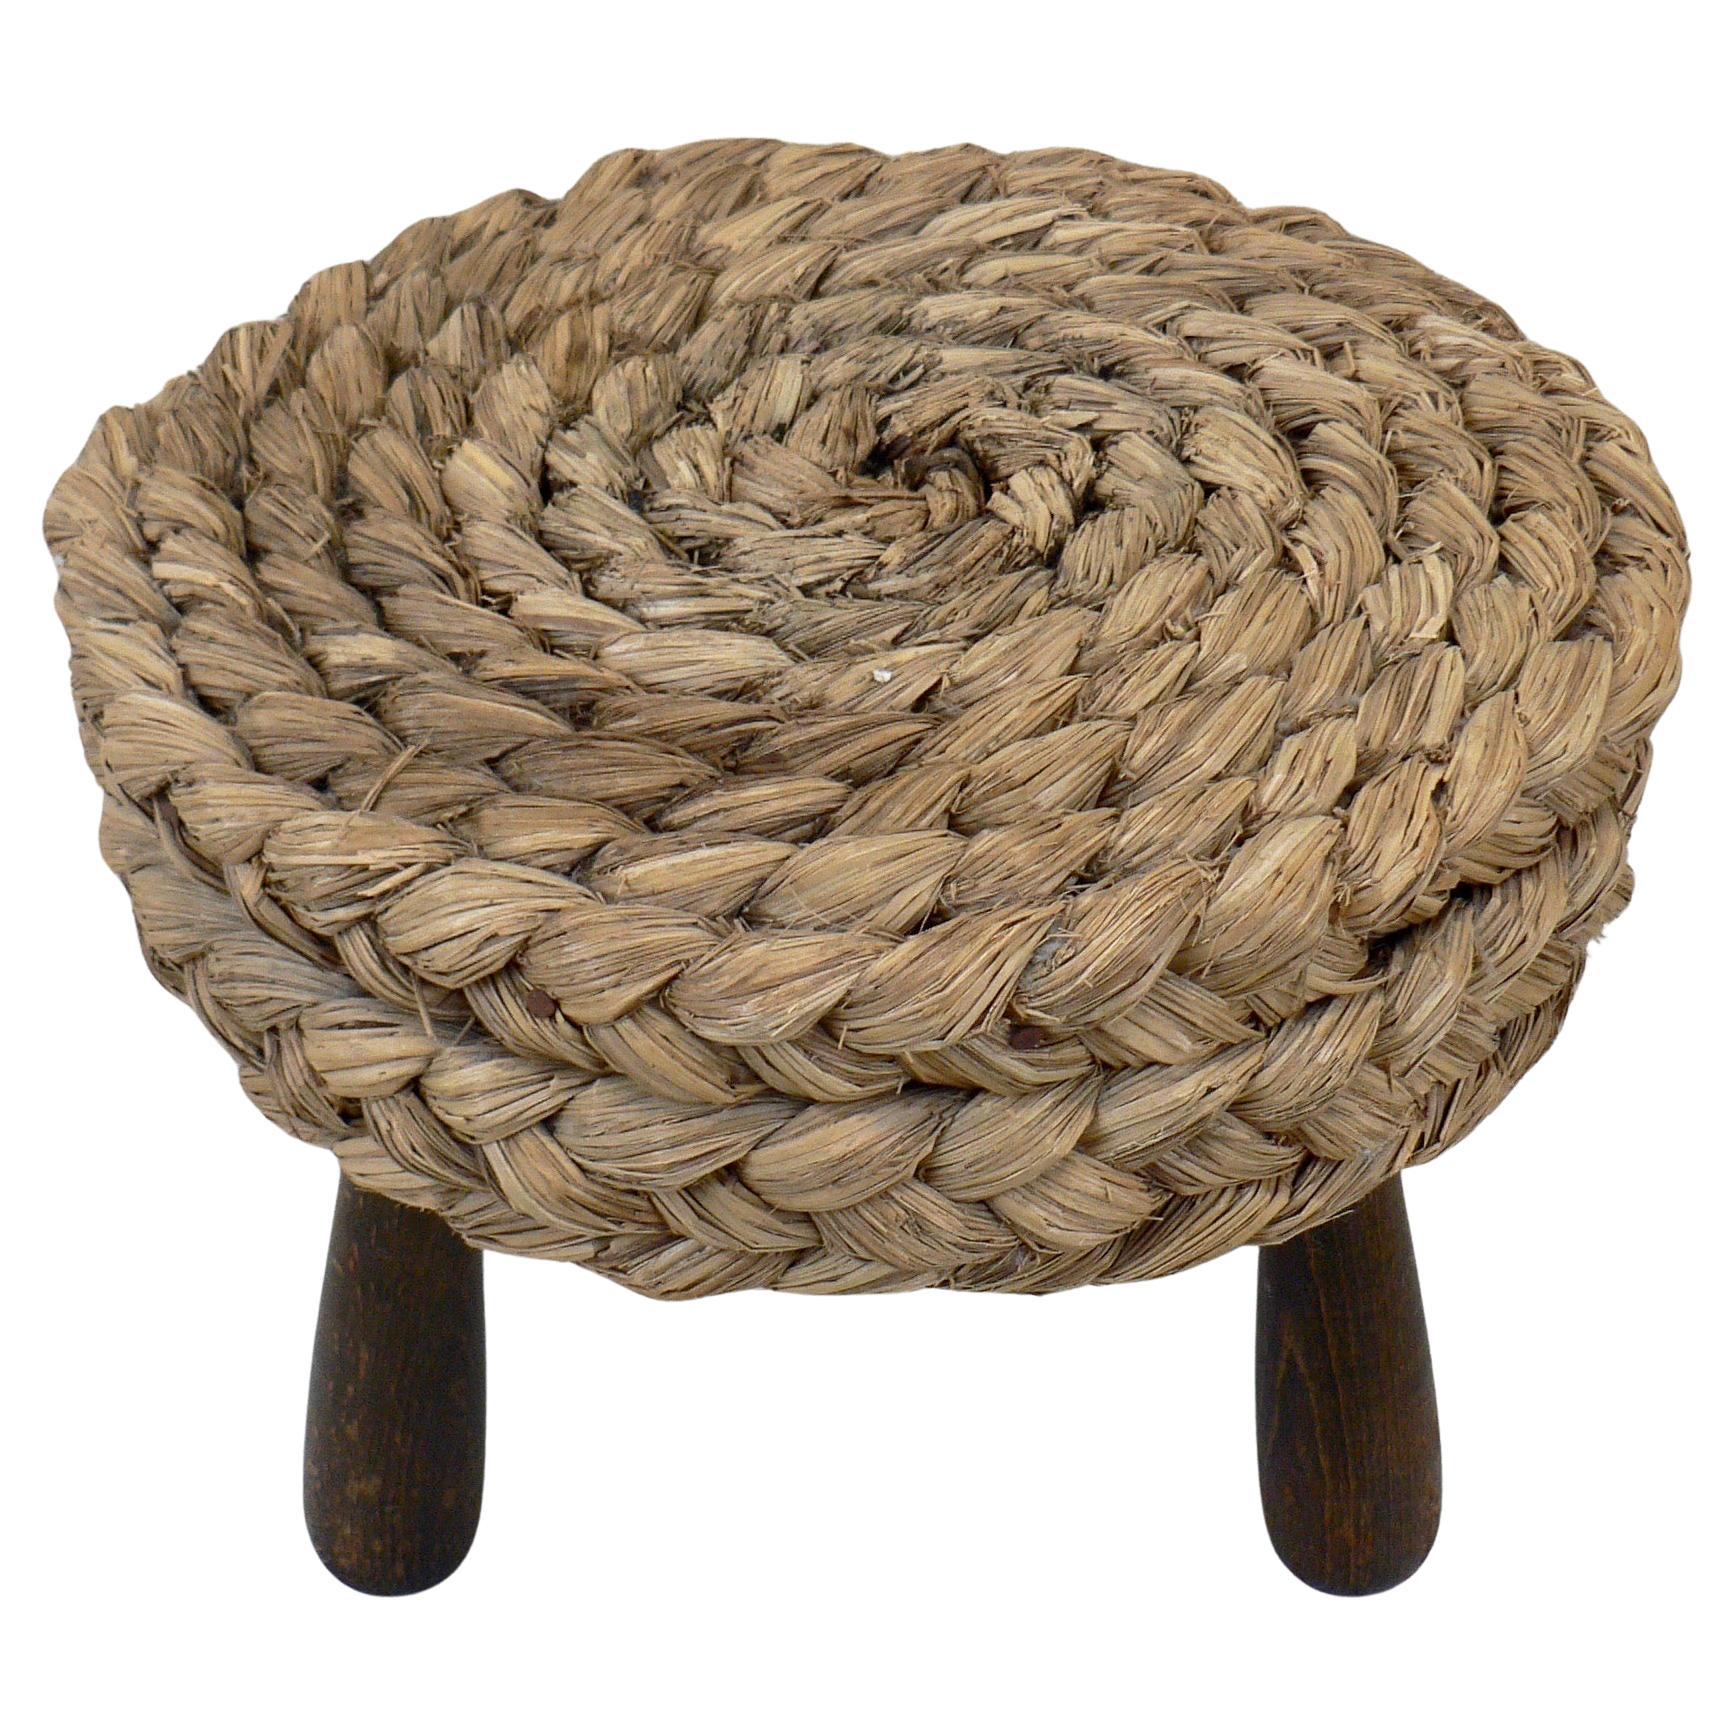 Mid-century French low Shepard's stool designed by Adrien Audoux and Frida Minet. This rustic French pouf showcases a circular seat crafted from woven raffia/rattan, supported by tripod legs and an oak keel base. Maintaining its original condition.